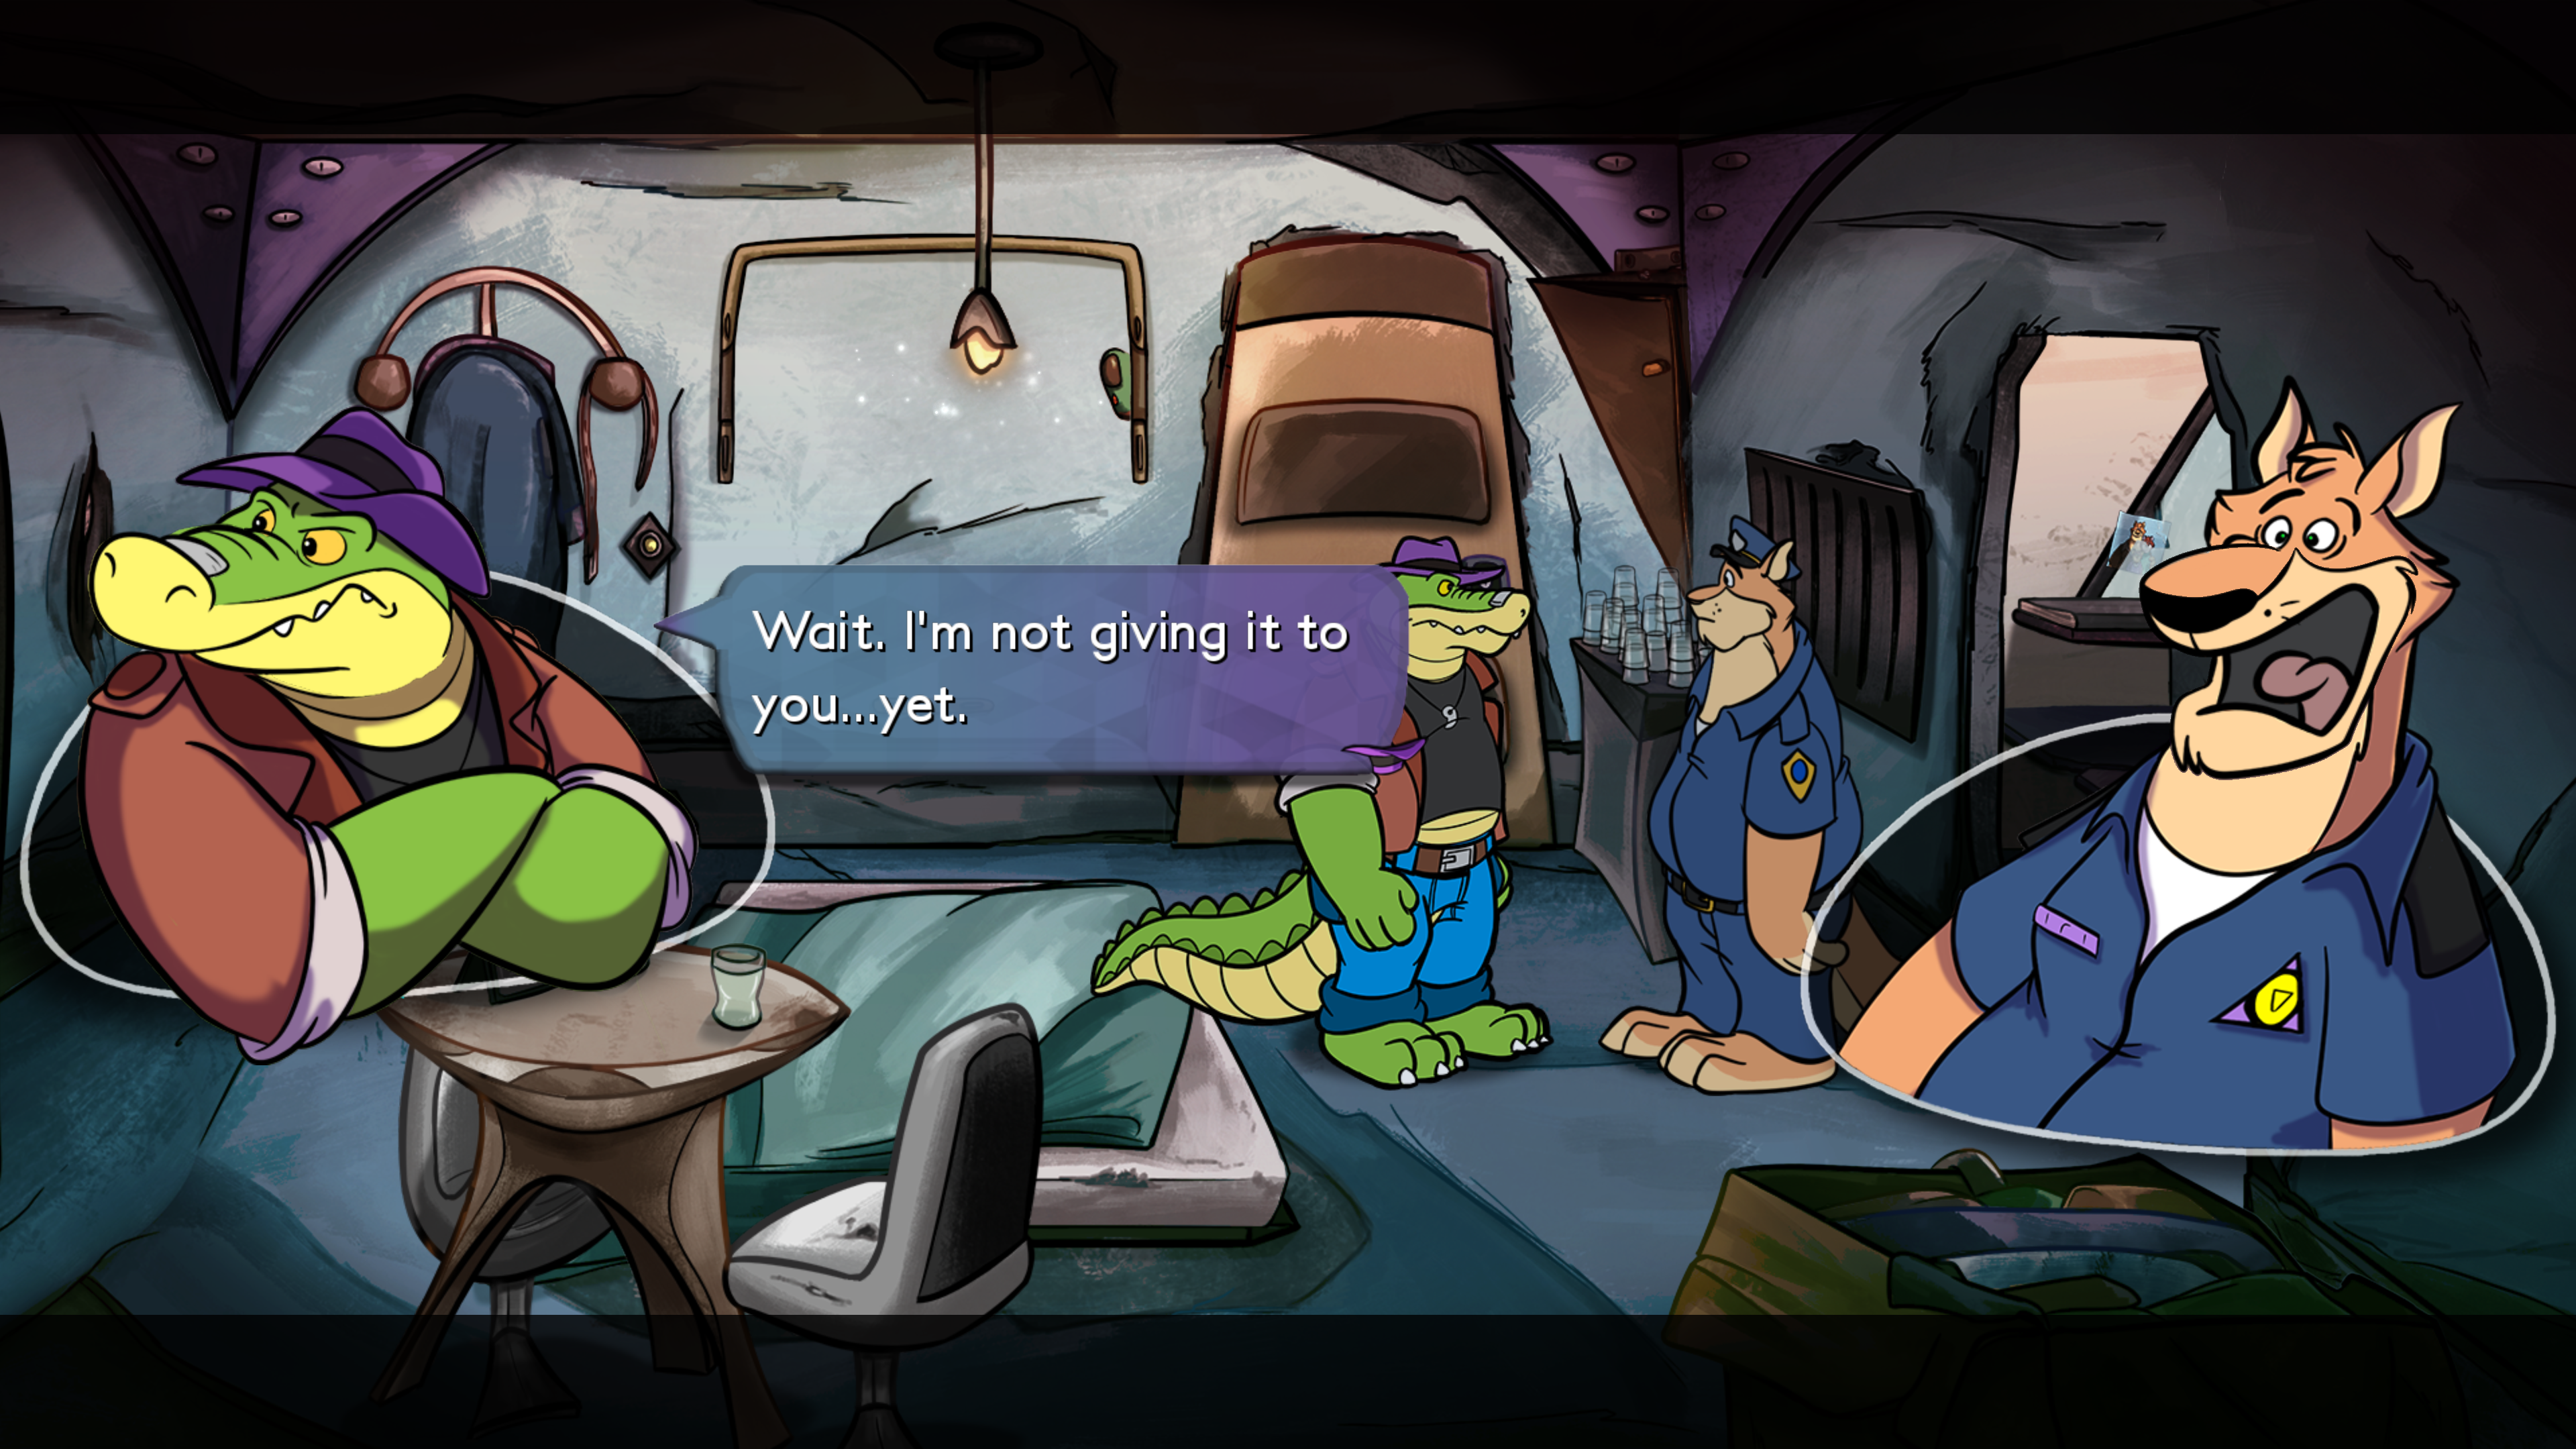 a cartoon alligator wearing a purple hat, brown jacket and jeans engaged in conversation with a cat wearing a police uniform. Both characters are standing in a grubby apartment with large visible cracks in the walls. The alligator with his head turned away is saying "Wait. I'm not giving it to you... yet." The cat has a shocked look on his face.